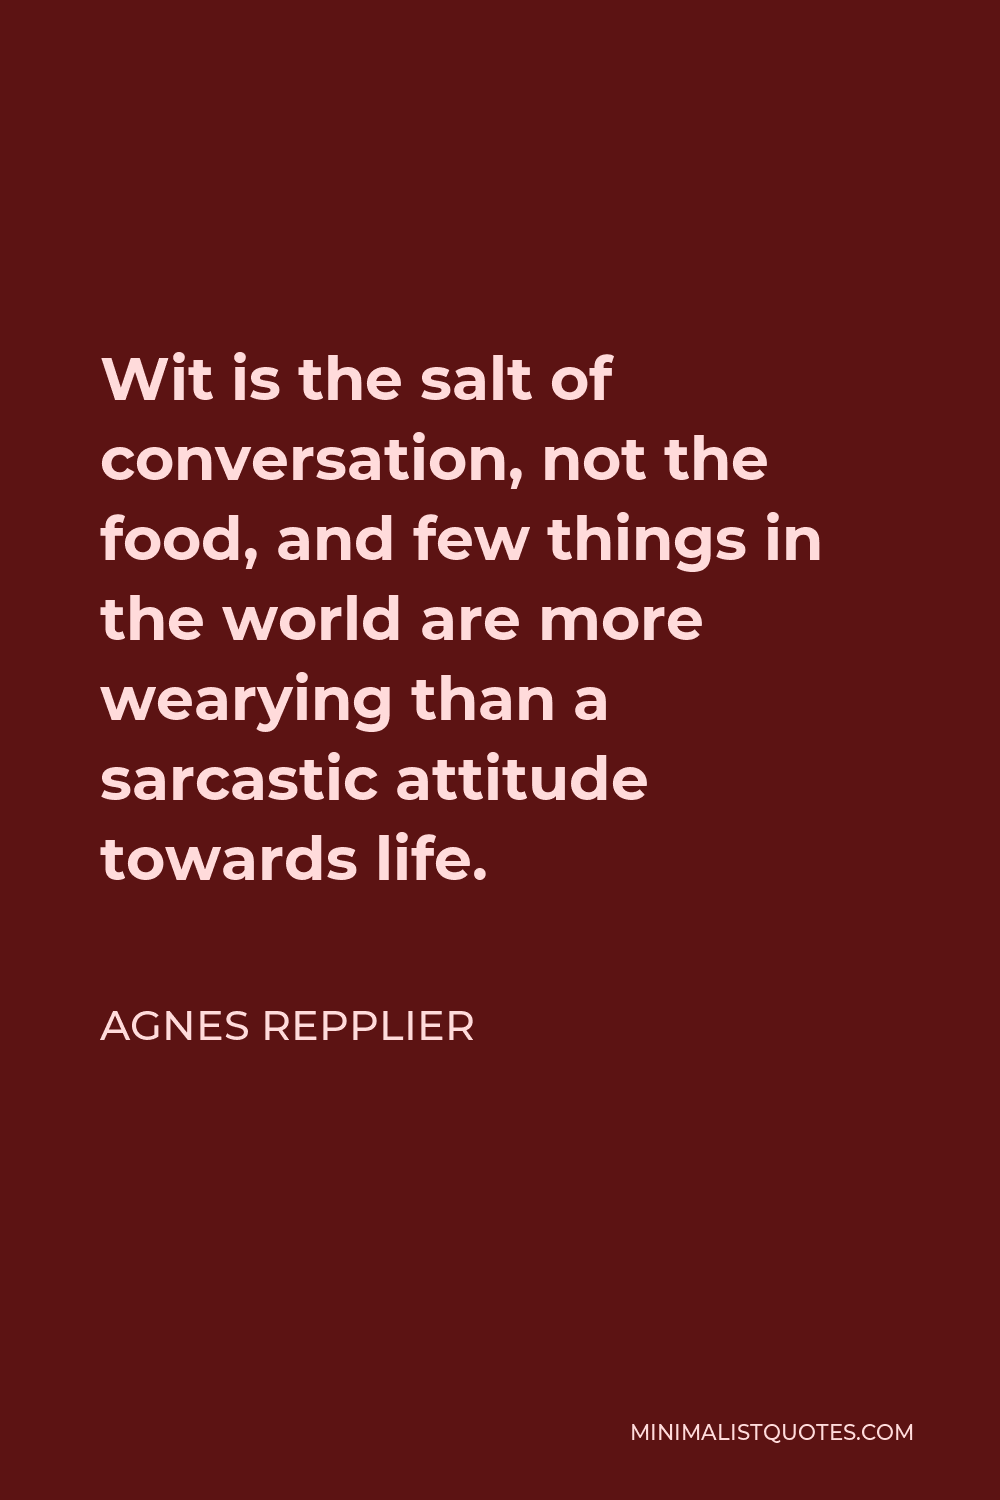 Agnes Repplier Quote - Wit is the salt of conversation, not the food, and few things in the world are more wearying than a sarcastic attitude towards life.